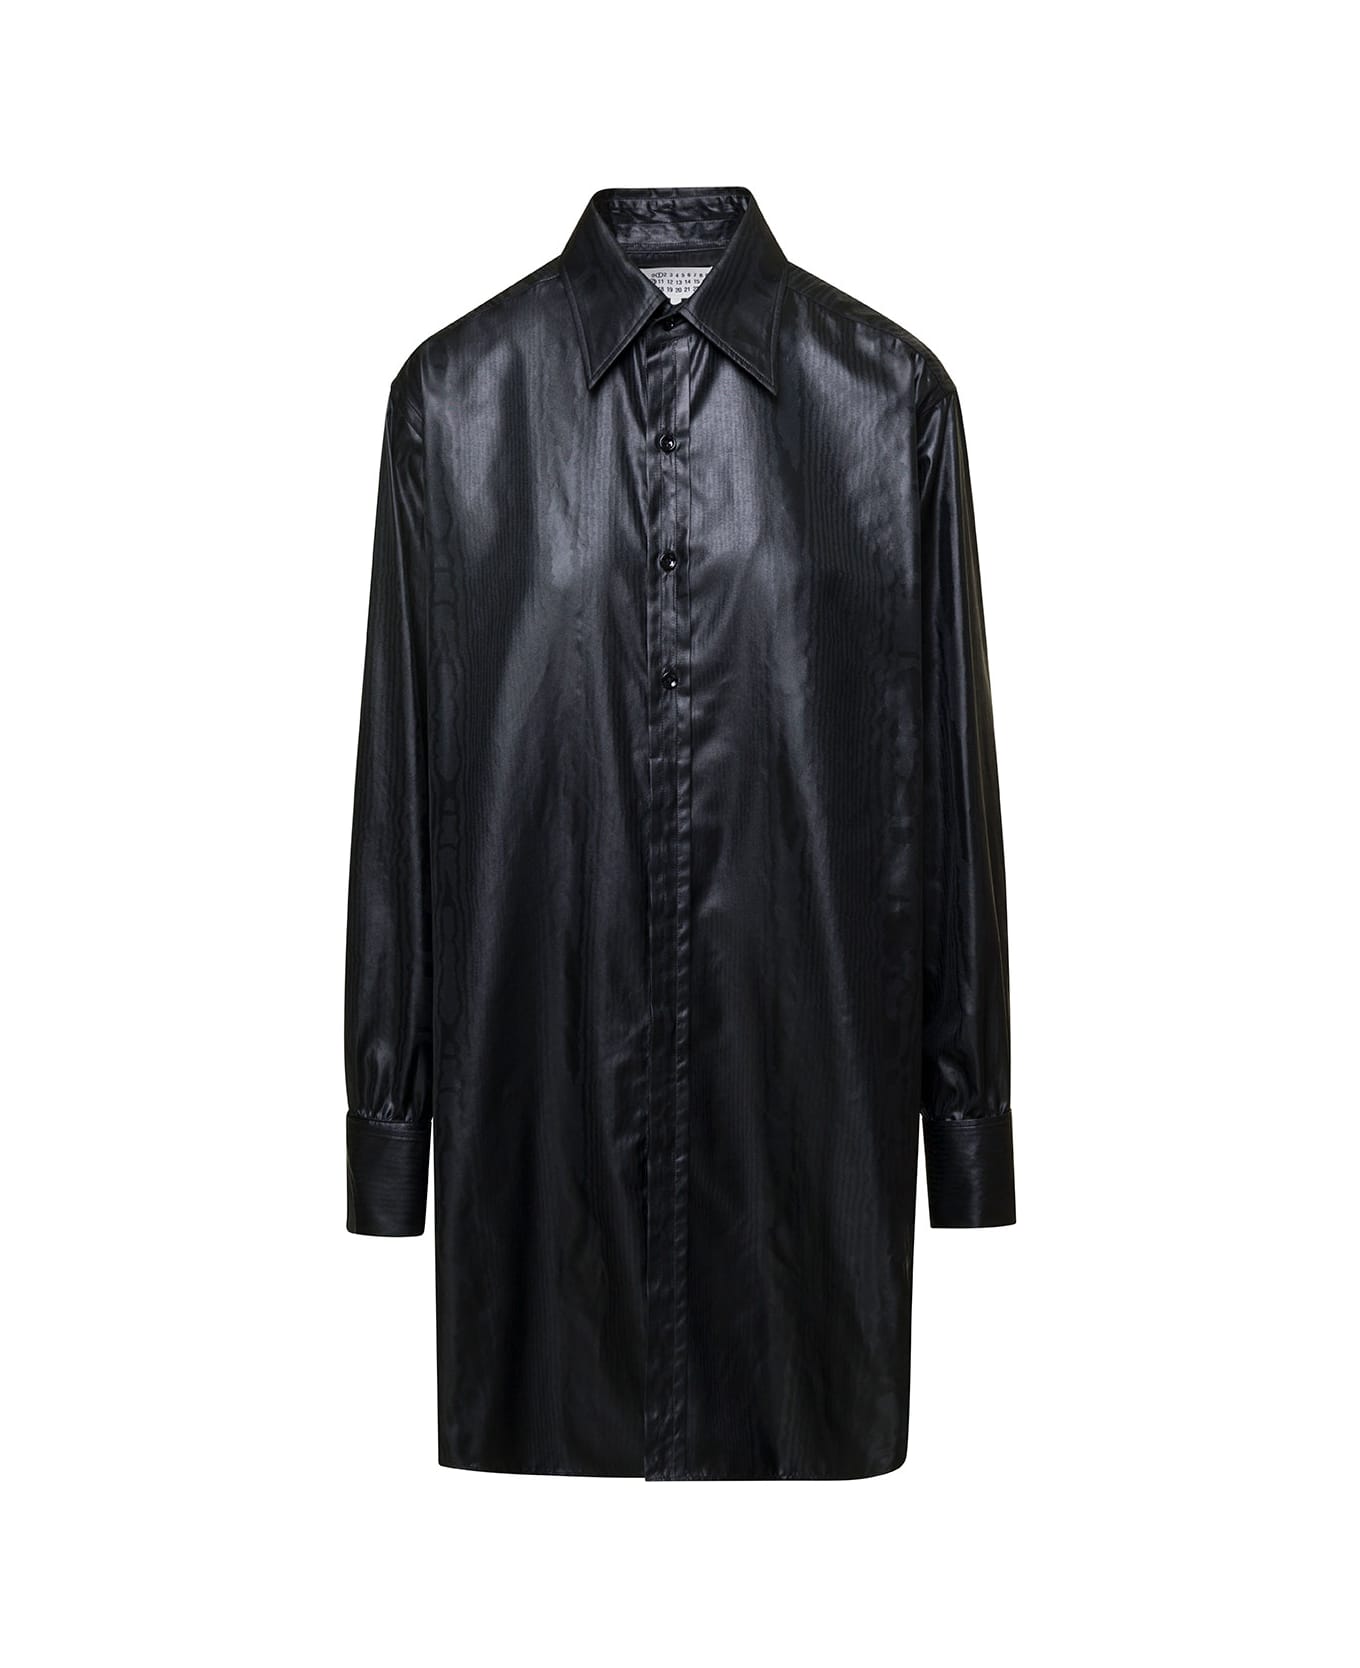 Maison Margiela Long Black Shirt With Classic Collar In Faux Leather Woman - Black